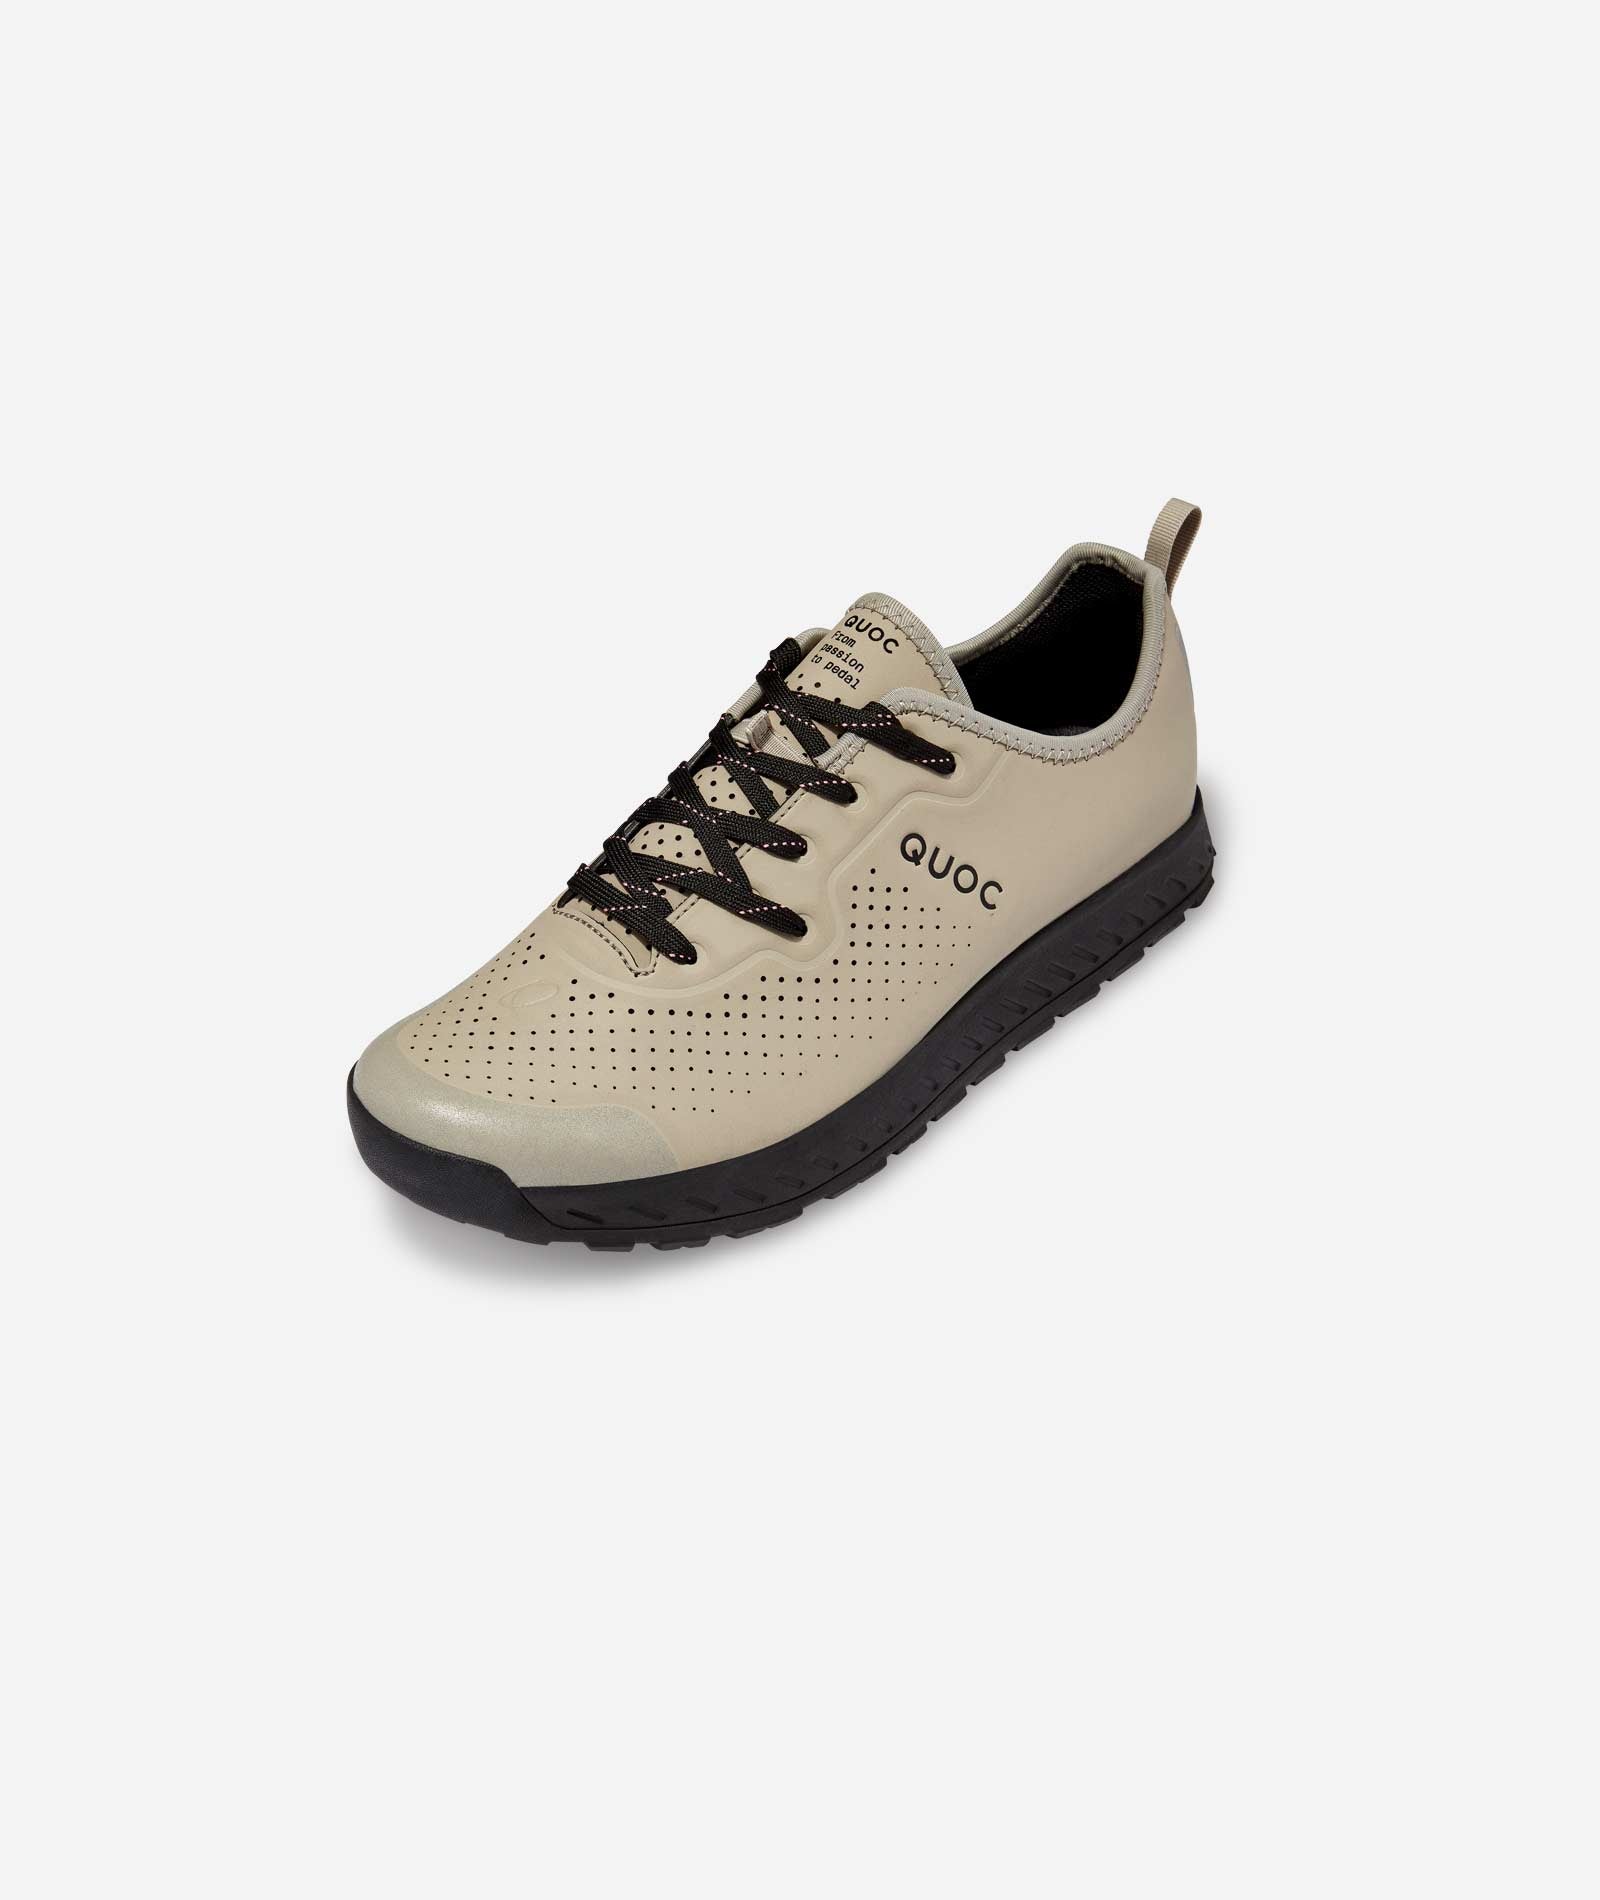 Weekend City, All Purpose & MTB Cycling Shoe - Sand | QUOC